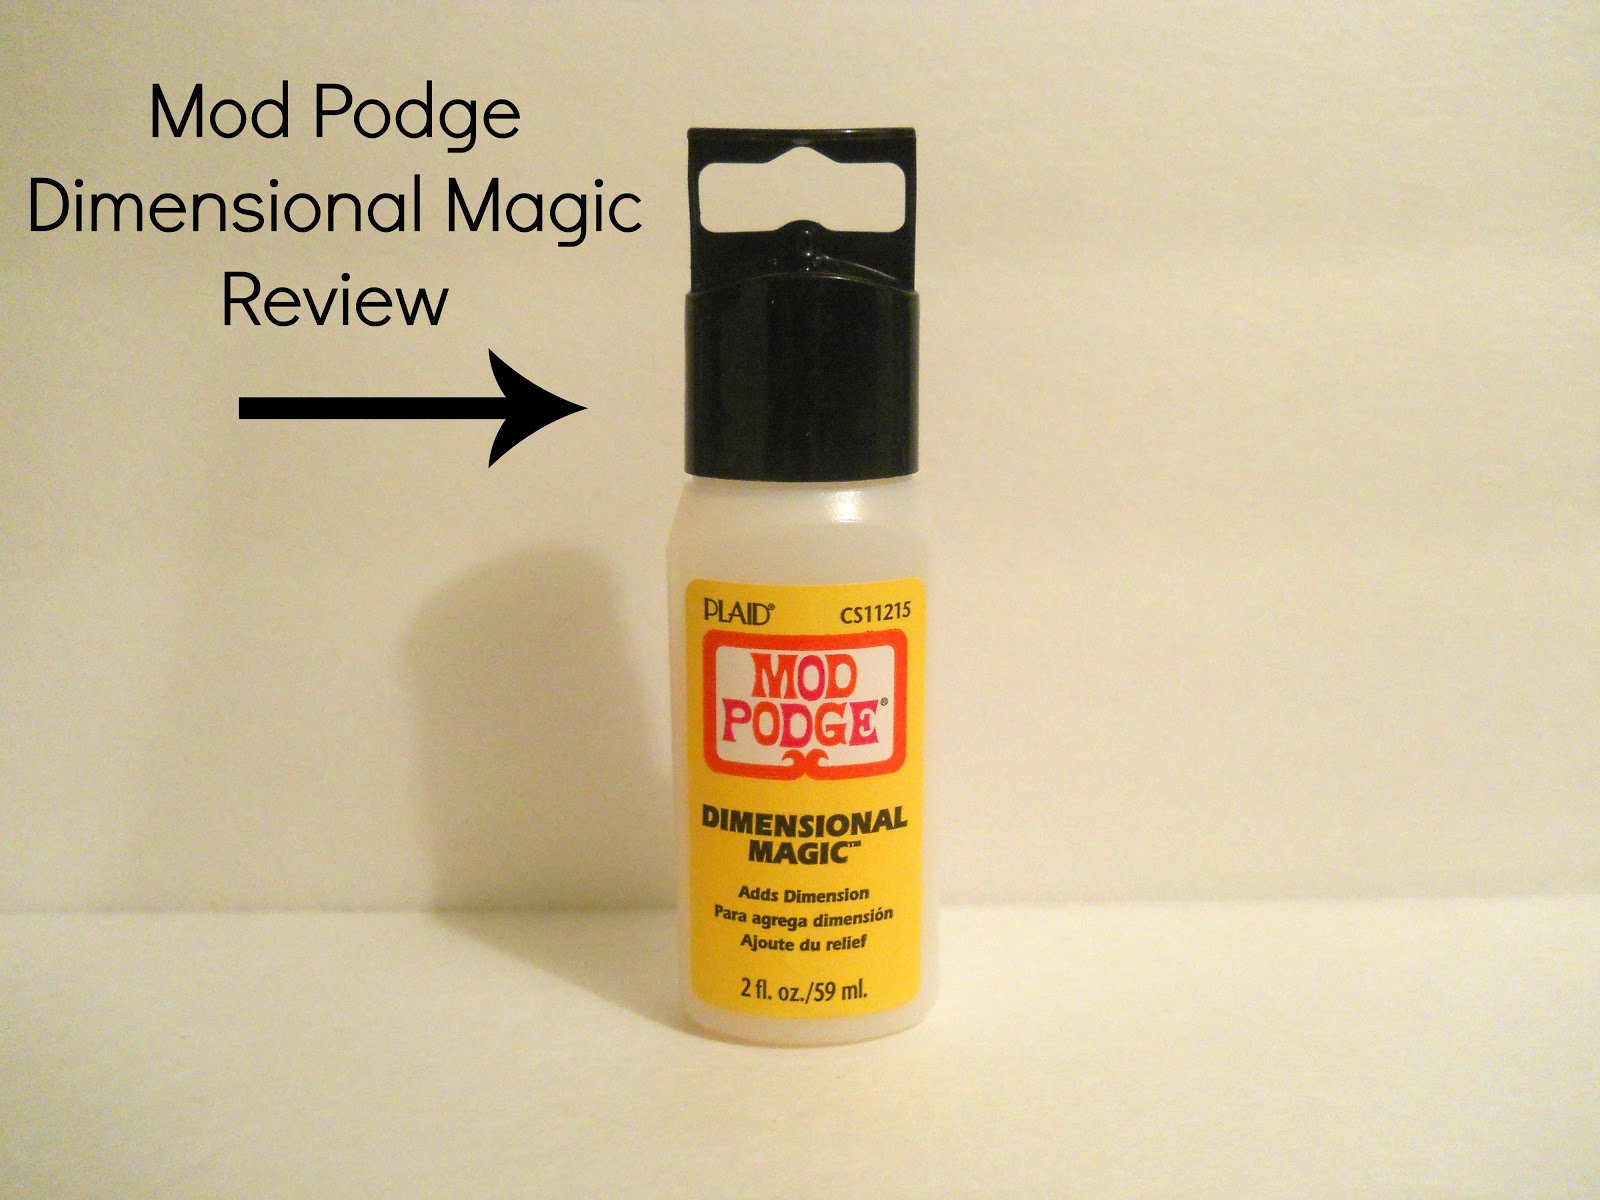 Mod Podge 101 - Your How-to Guide to Mod Podge!